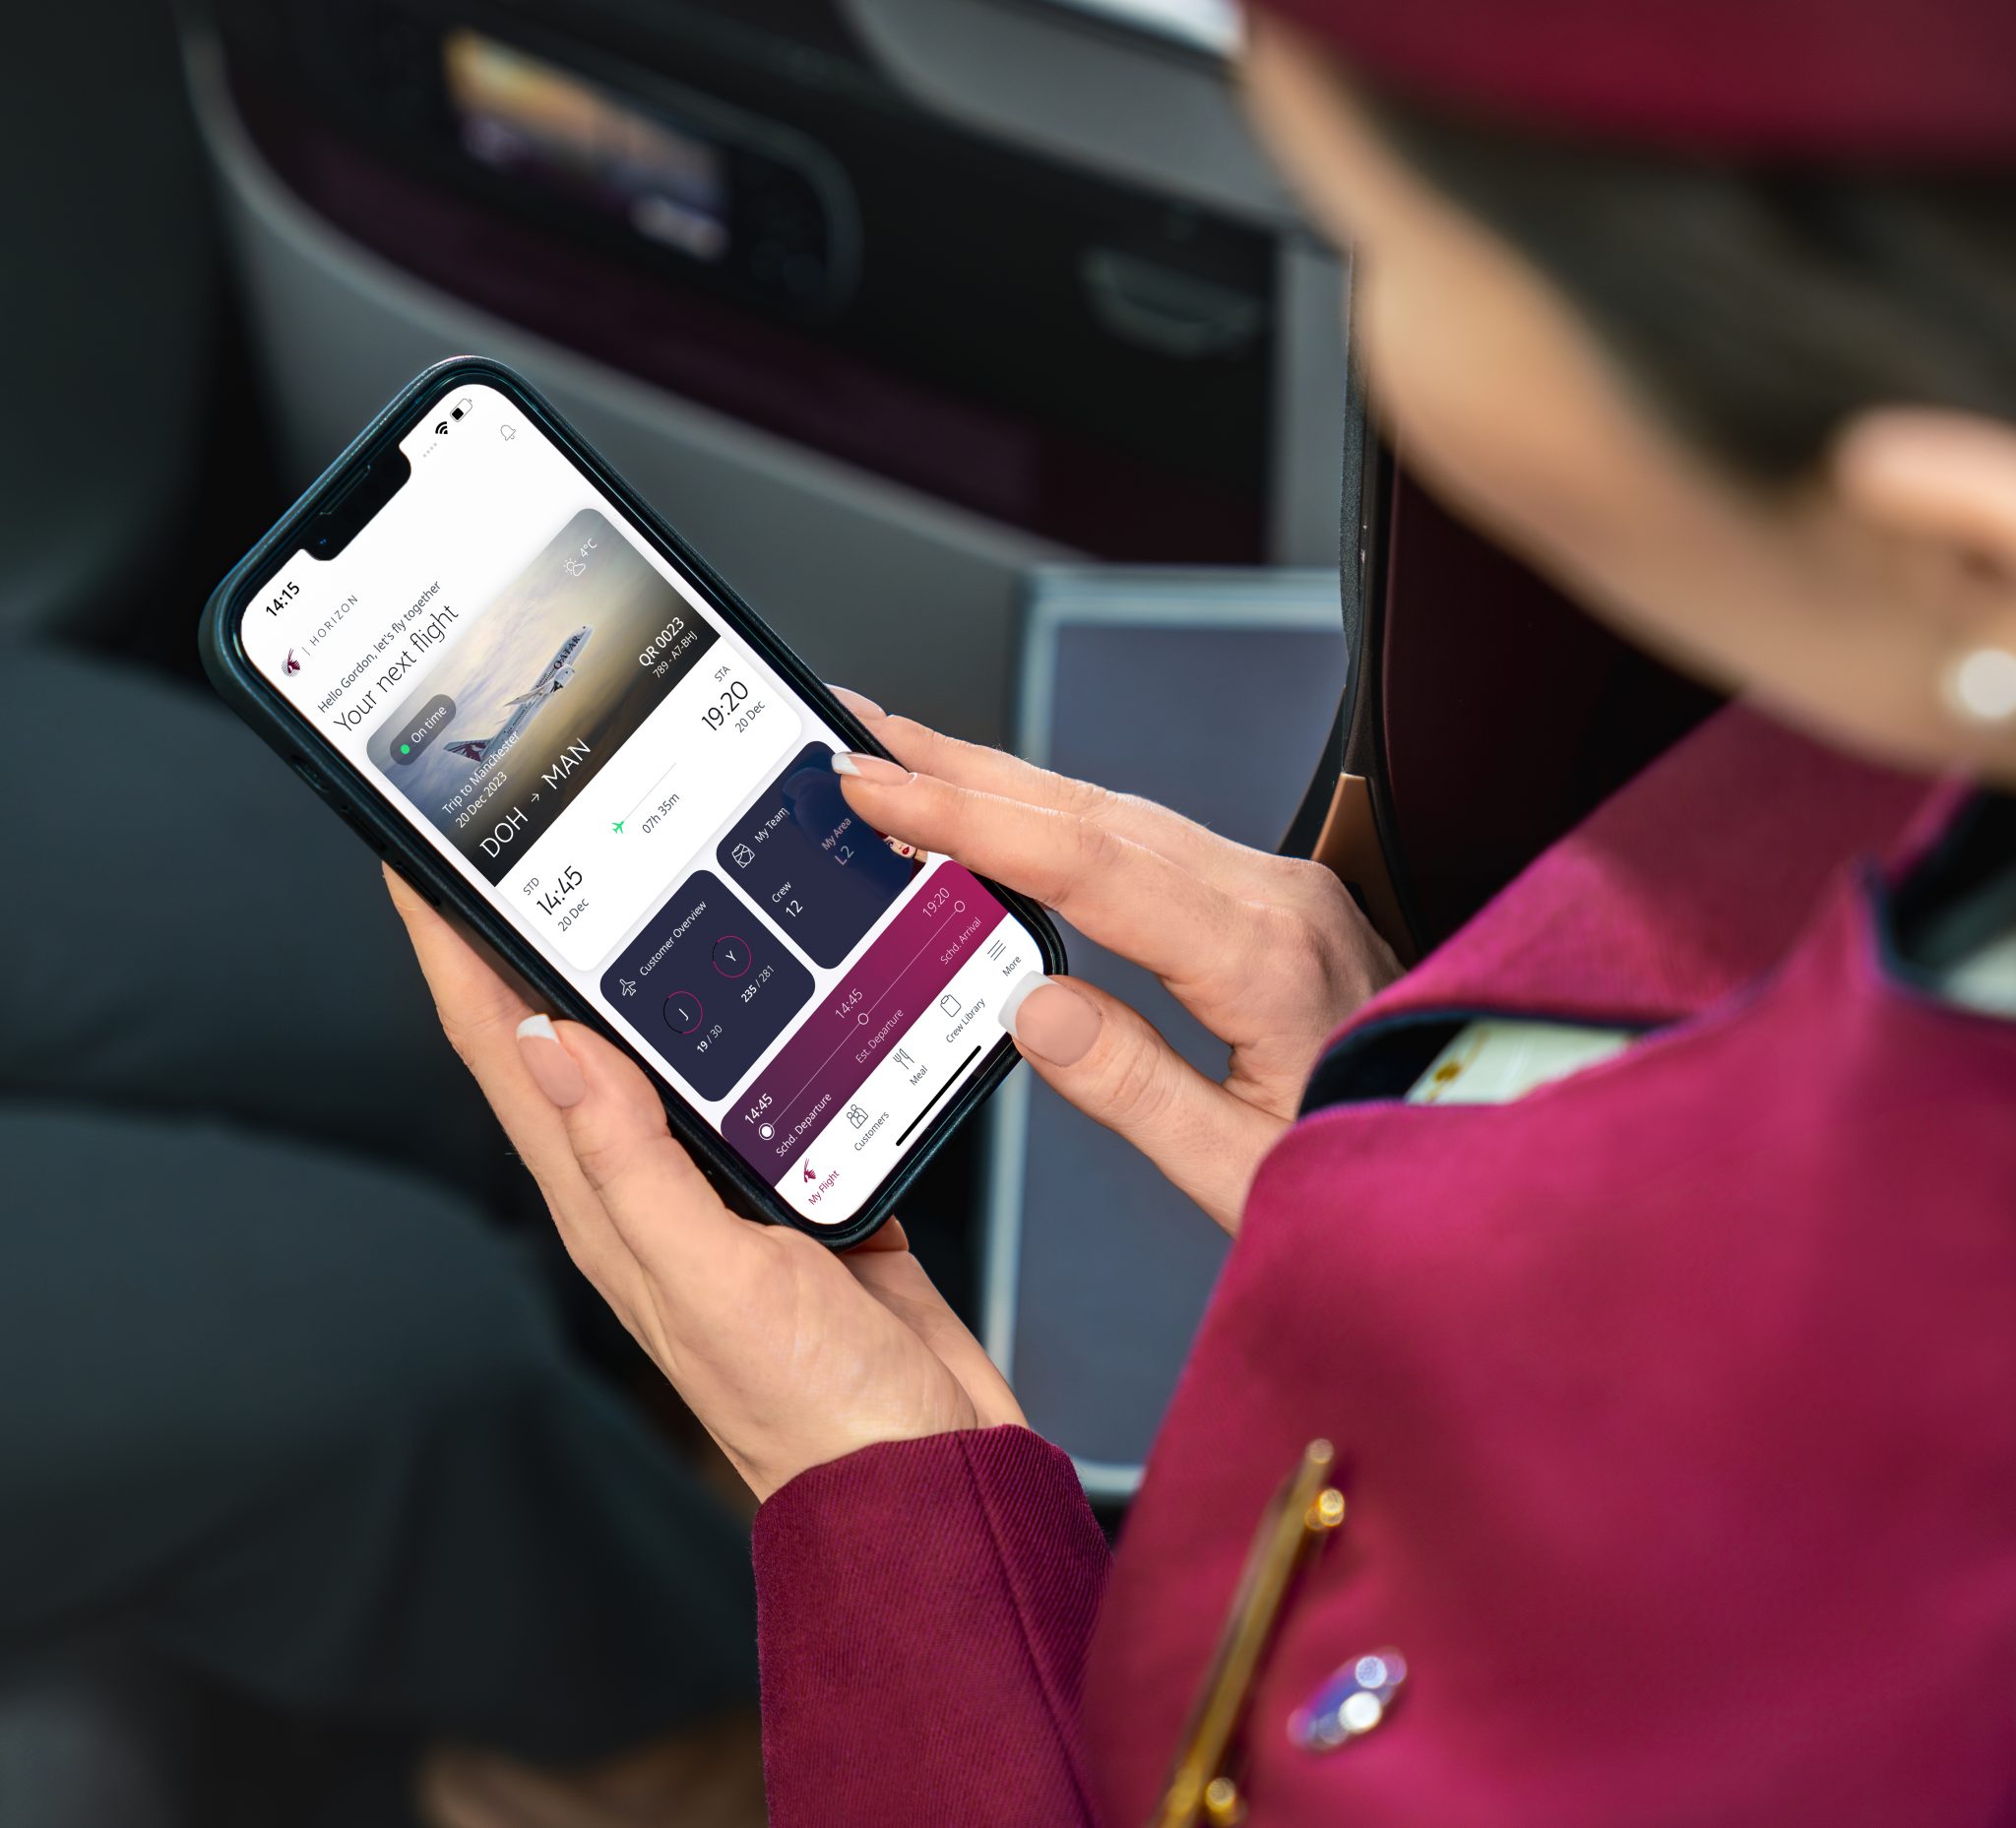 IDEAS: Qatar Airways to Provide Cabin Crew with Smart Tech